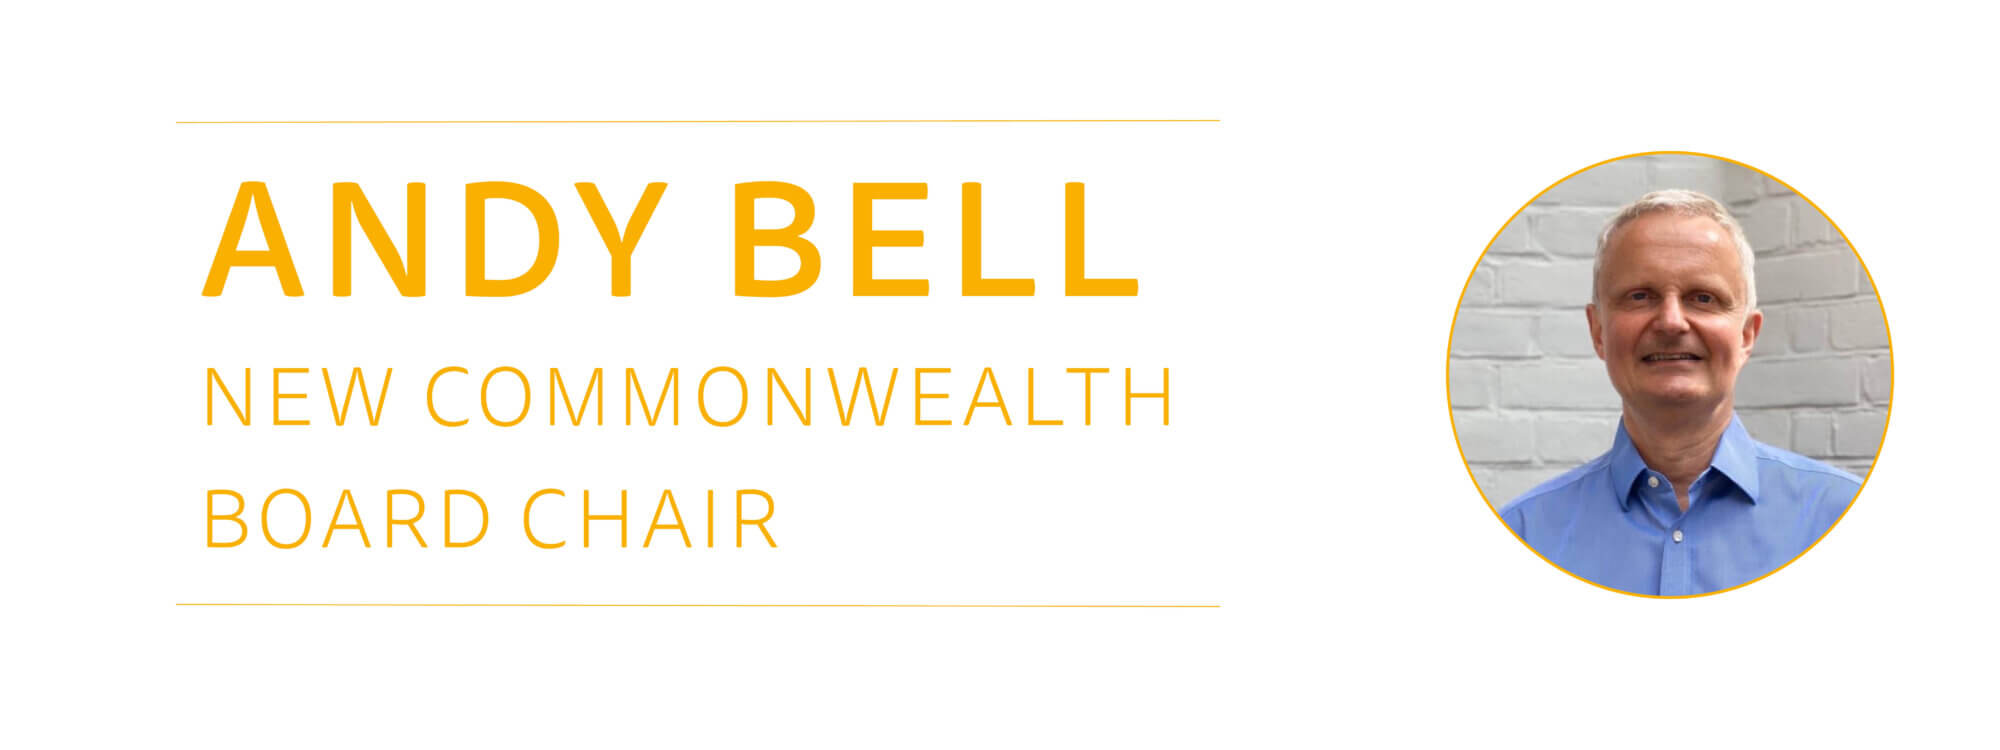 Andy Bell appointed as the new Scott Bader Commonwealth Board Chair